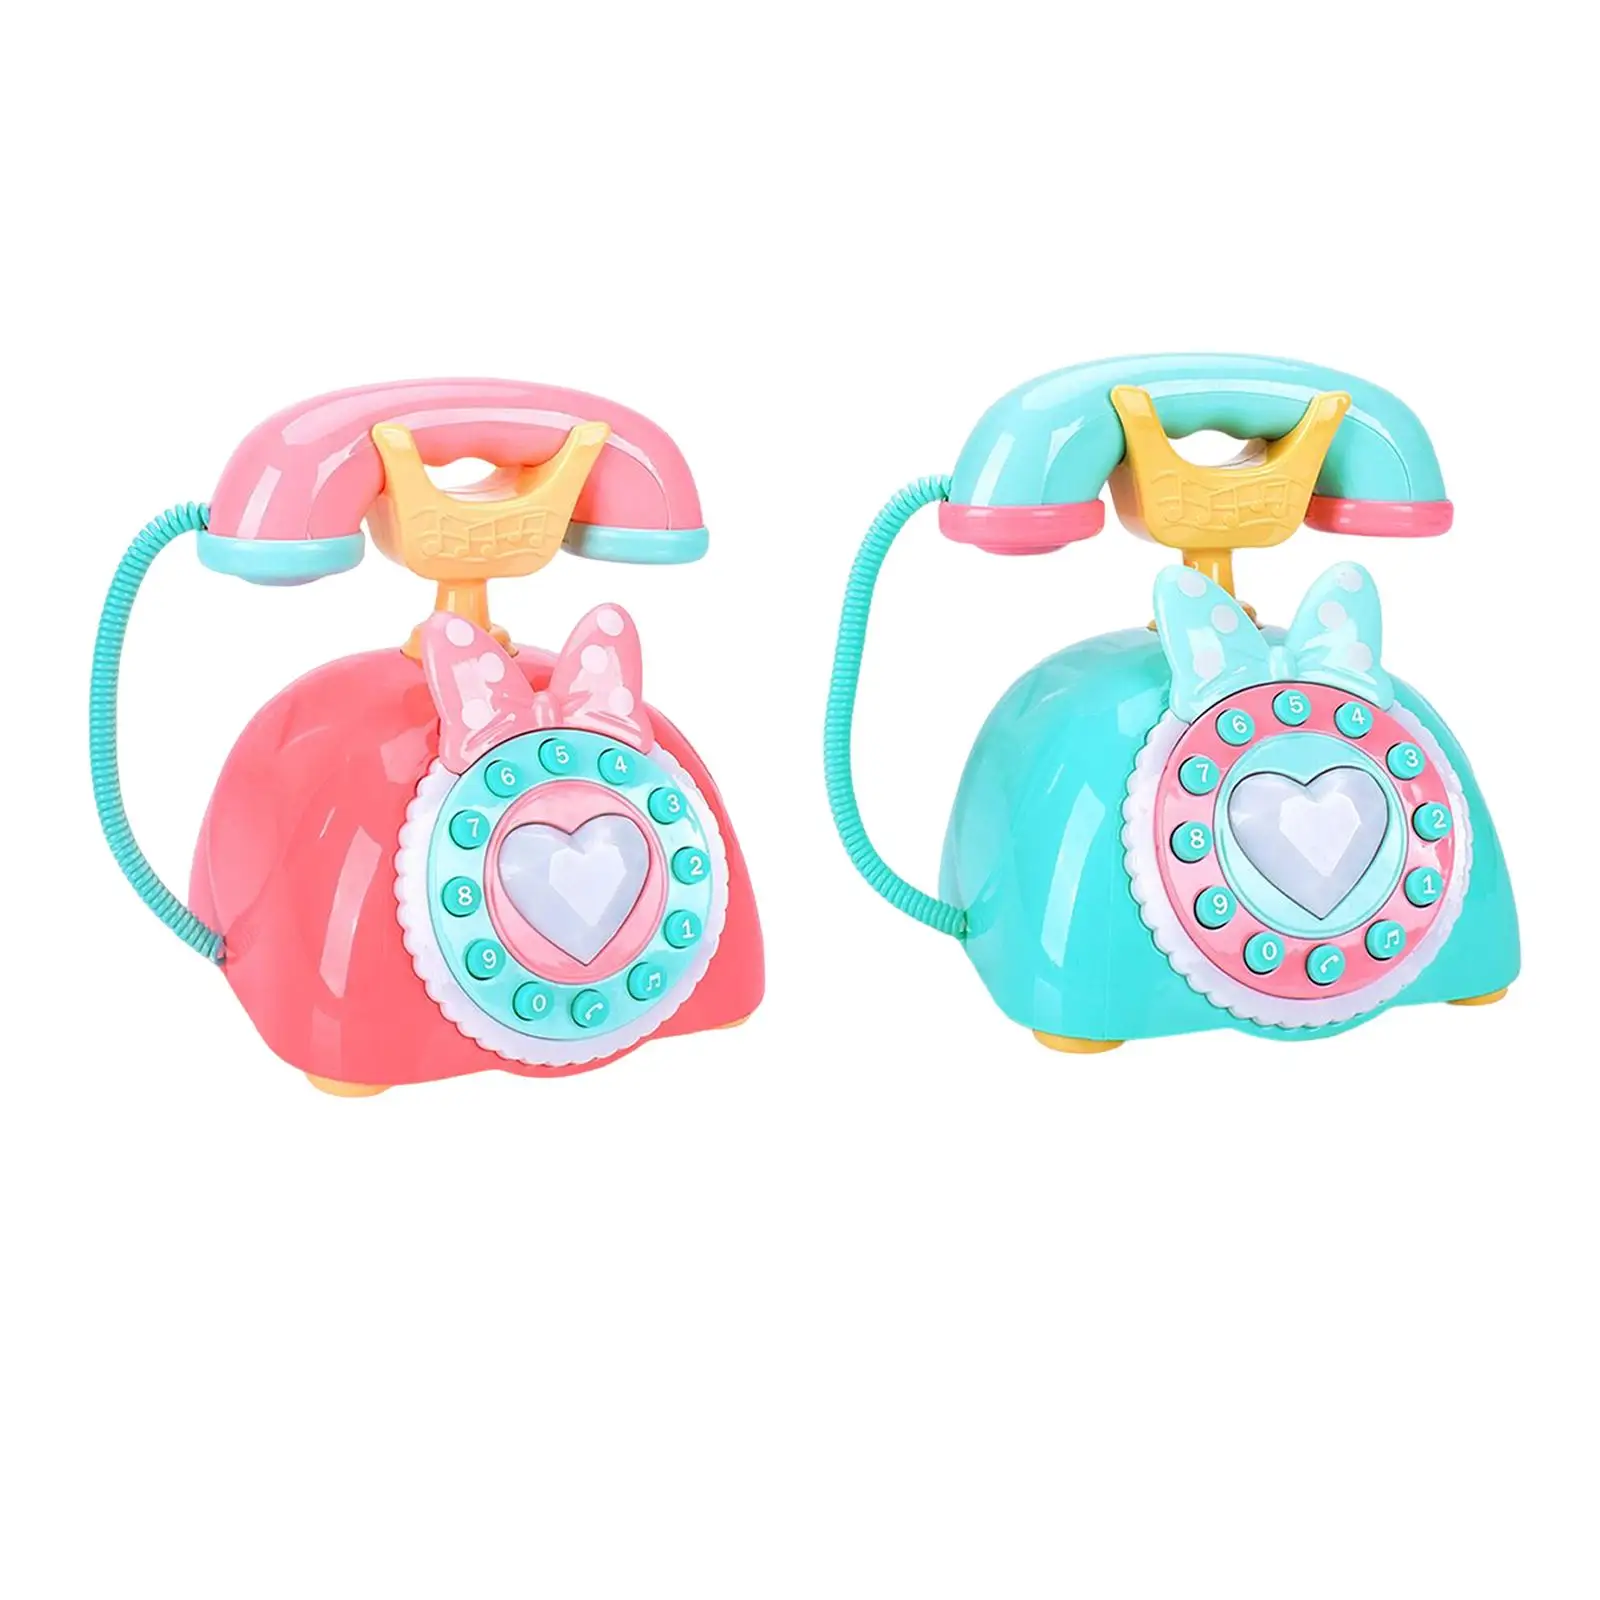 Retro Telephone Toy Gift Multifunction with Light for Preschool Pretend Play